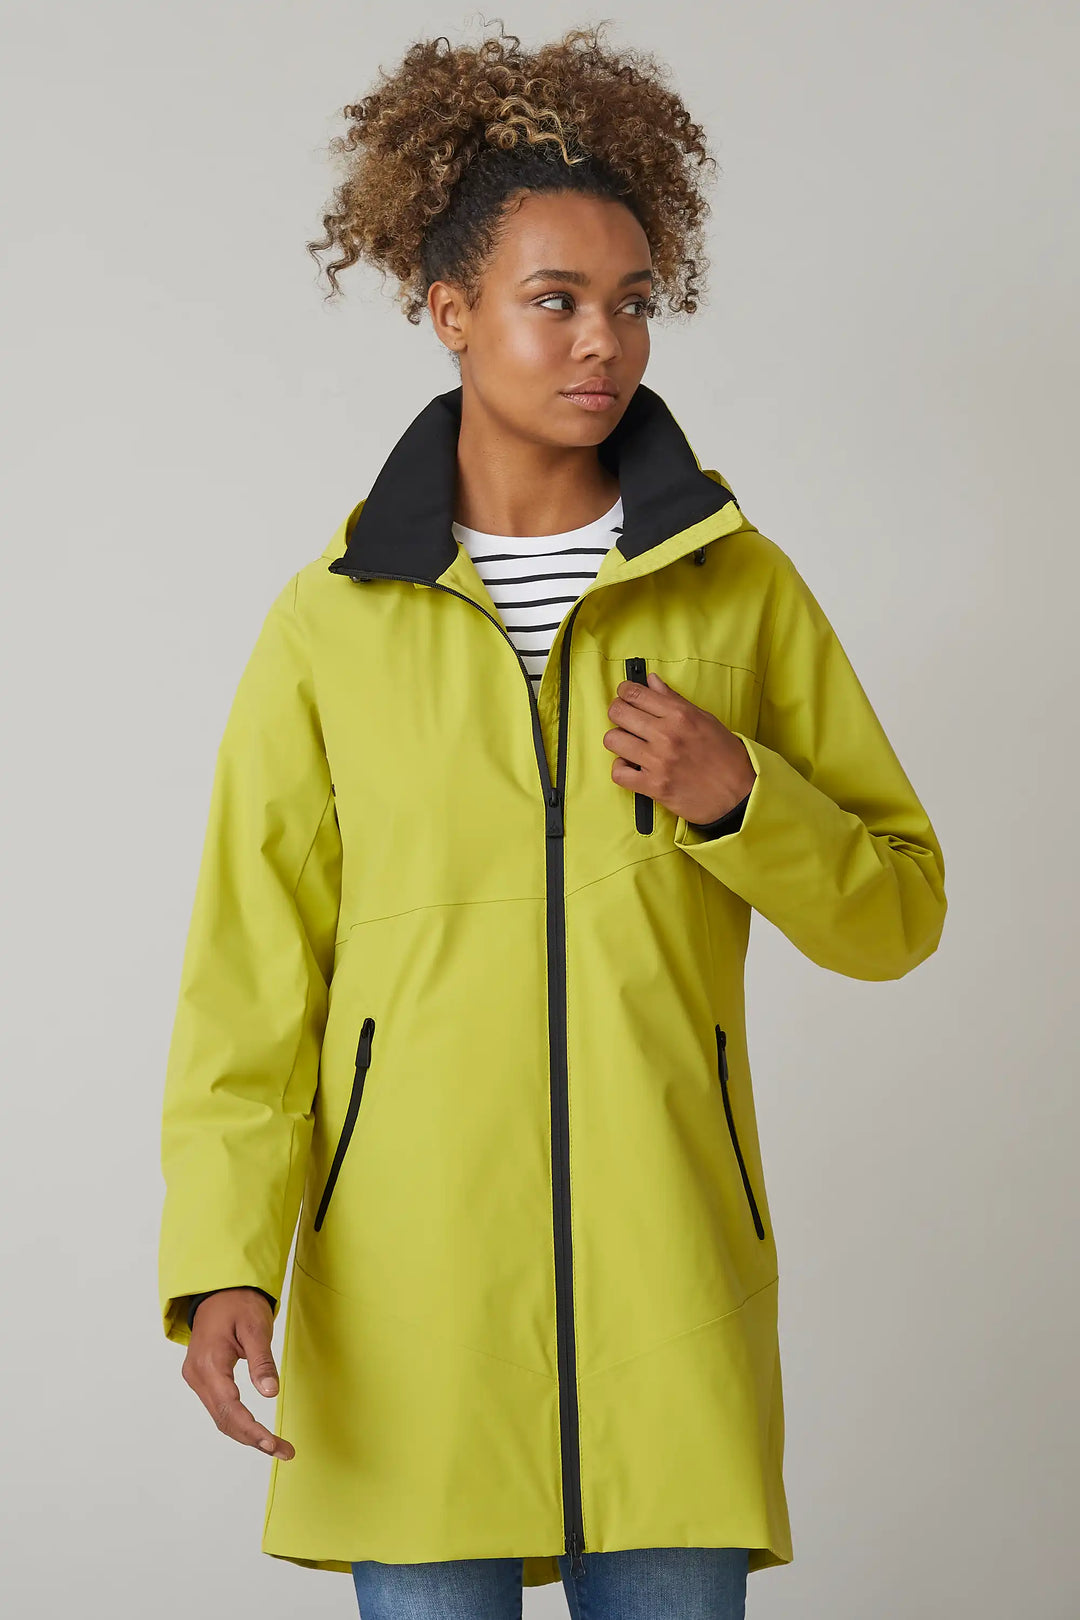 A model showcases a bright chartreuse raincoat with a protective hood, zip front, and spacious pockets for a rainy spring day, style 0124-2493-88-41